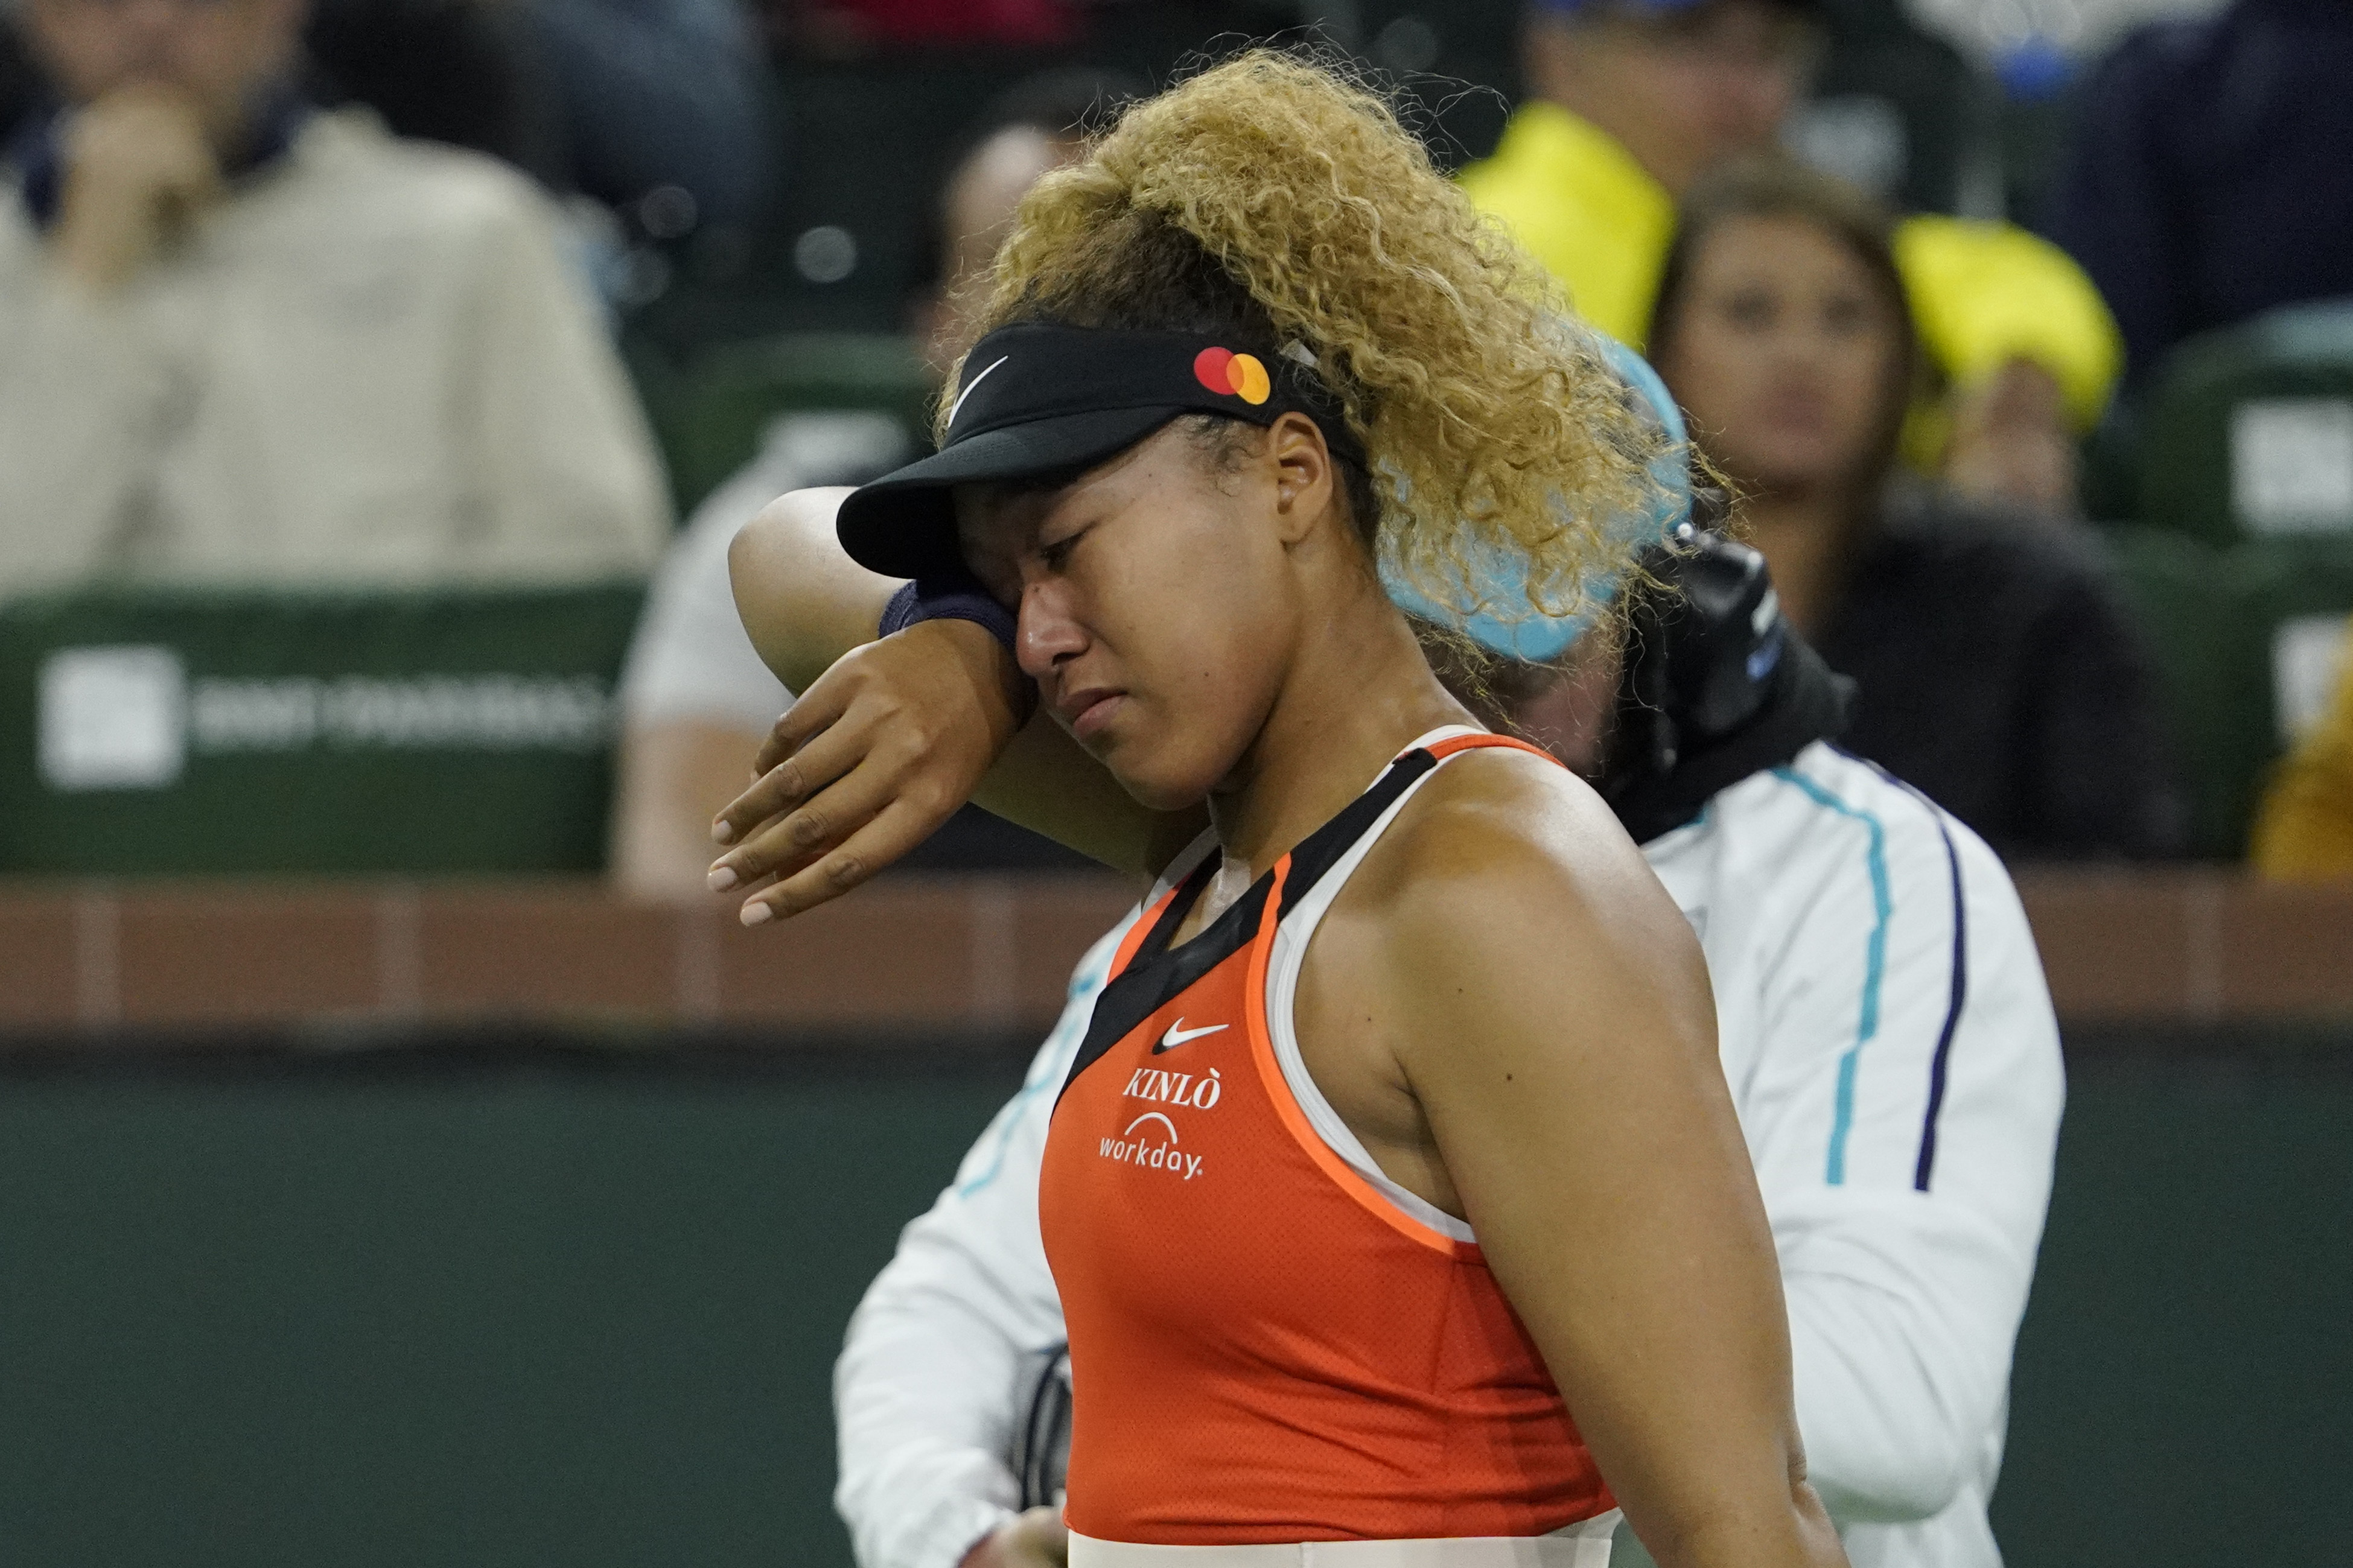 Naomi Osaka Heckled to Tears at the Same Court Where Serena Williams Faced Racism